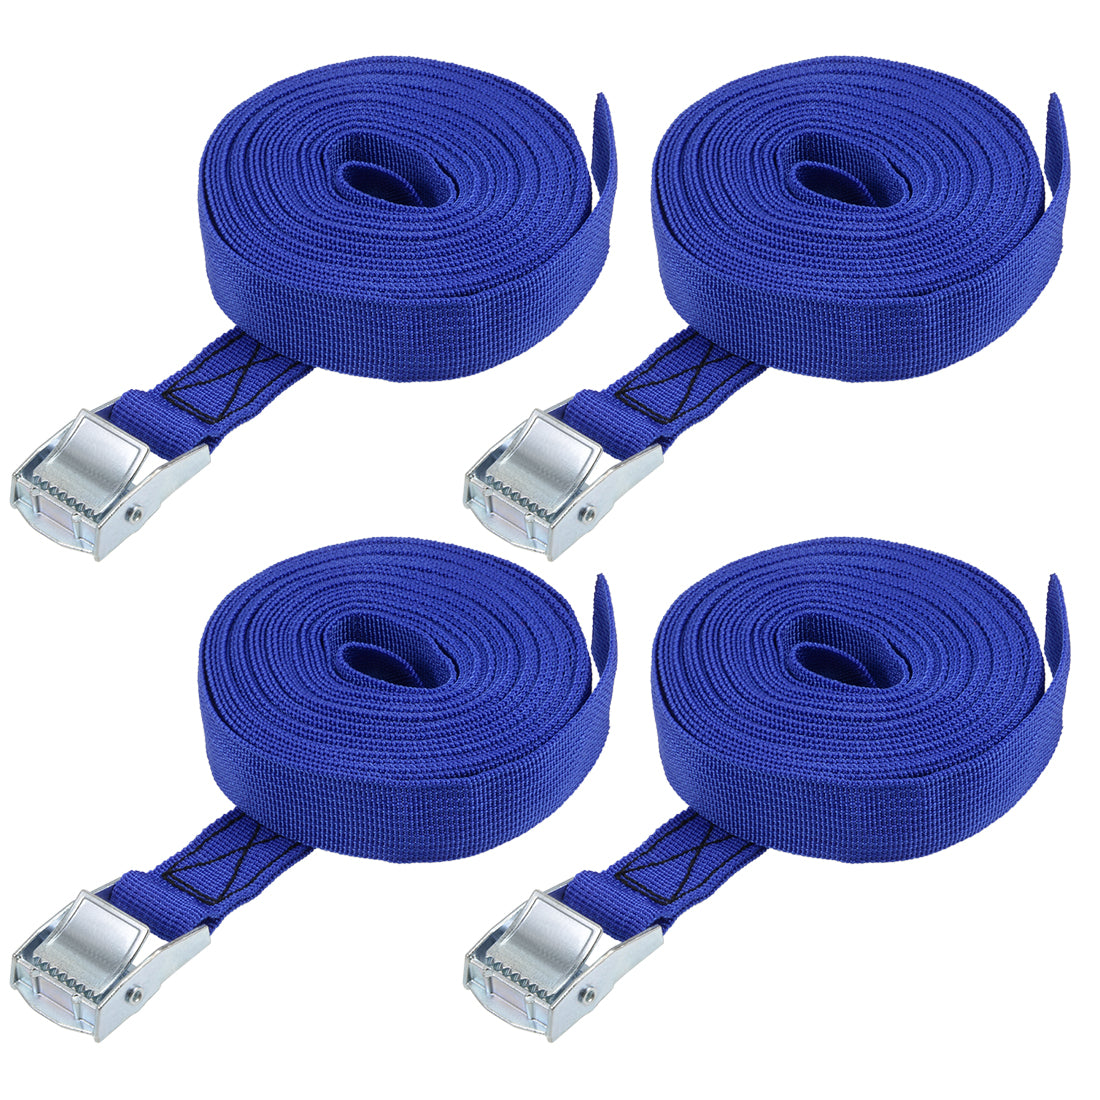 uxcell Uxcell 6M x 25mm Lashing Strap Cargo Tie Down Straps w Cam Lock Buckle 250Kg Work Load, Blue, 4Pcs